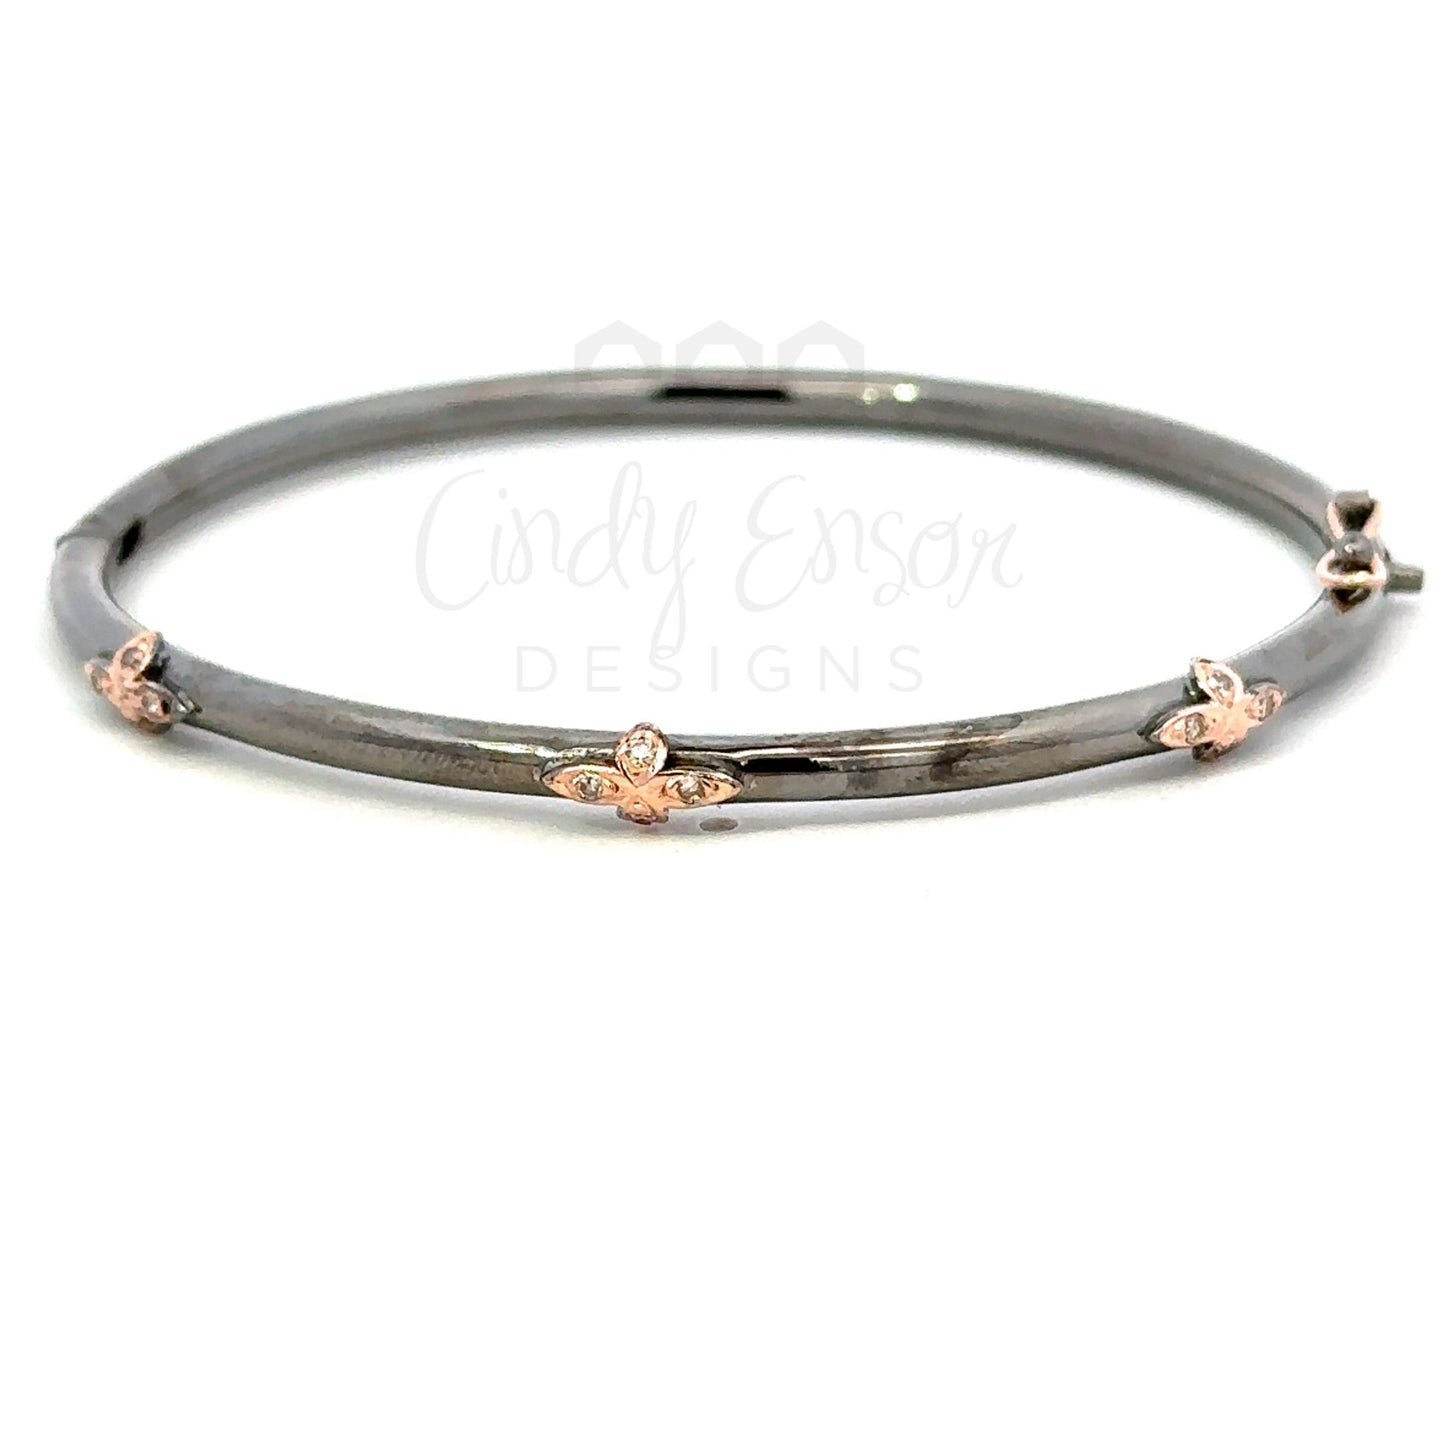 Thin Mixed Metal Bracelet with 3 Diamond Cross Accents